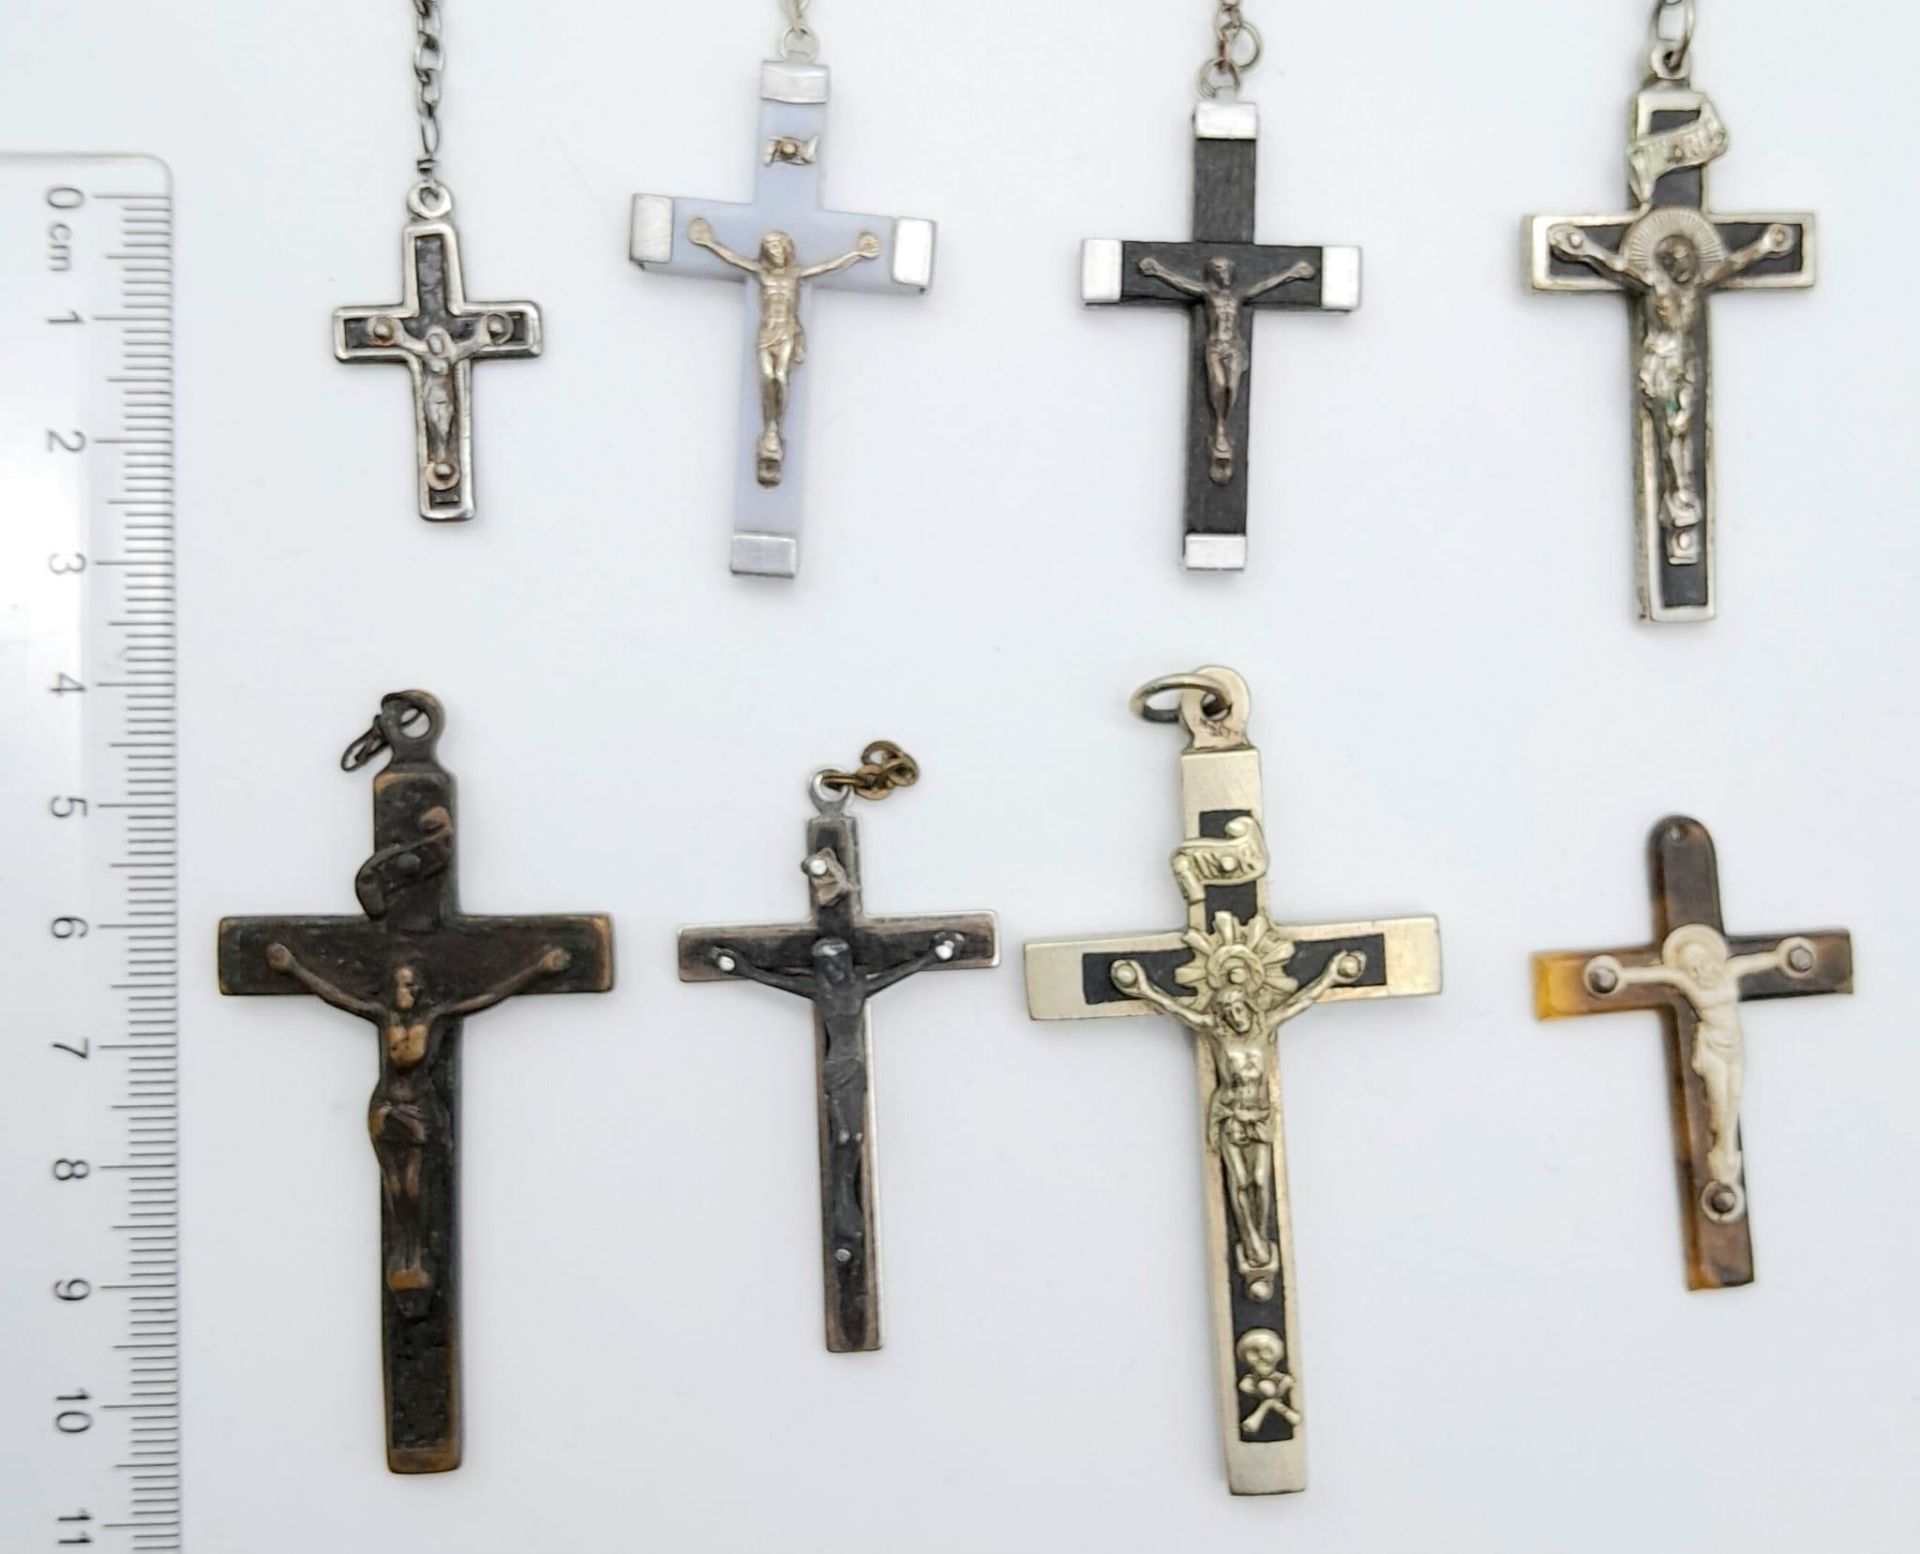 A Small Collection of Crucifix Pendants and Prayer Beads. All kept in a small decorative wood box. - Bild 4 aus 6